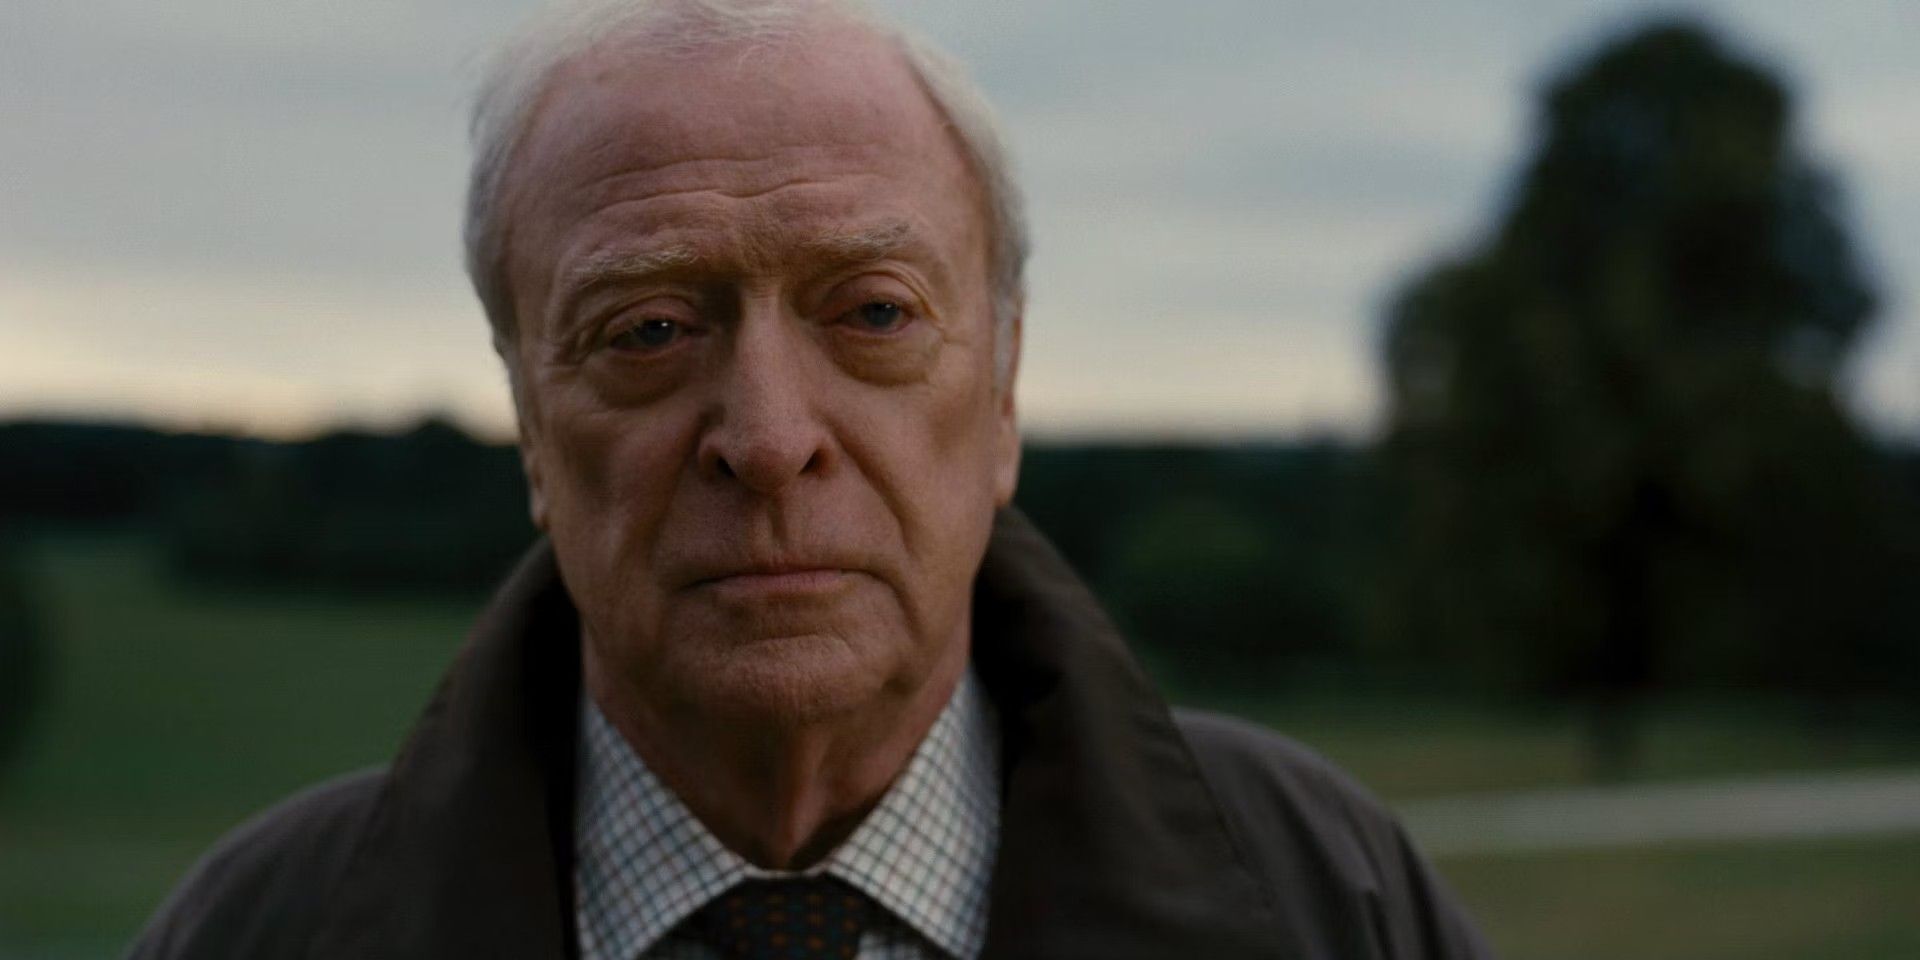 Michael Caine Confirms Acting Retirement At 90 After Starring In Over 160 Movies